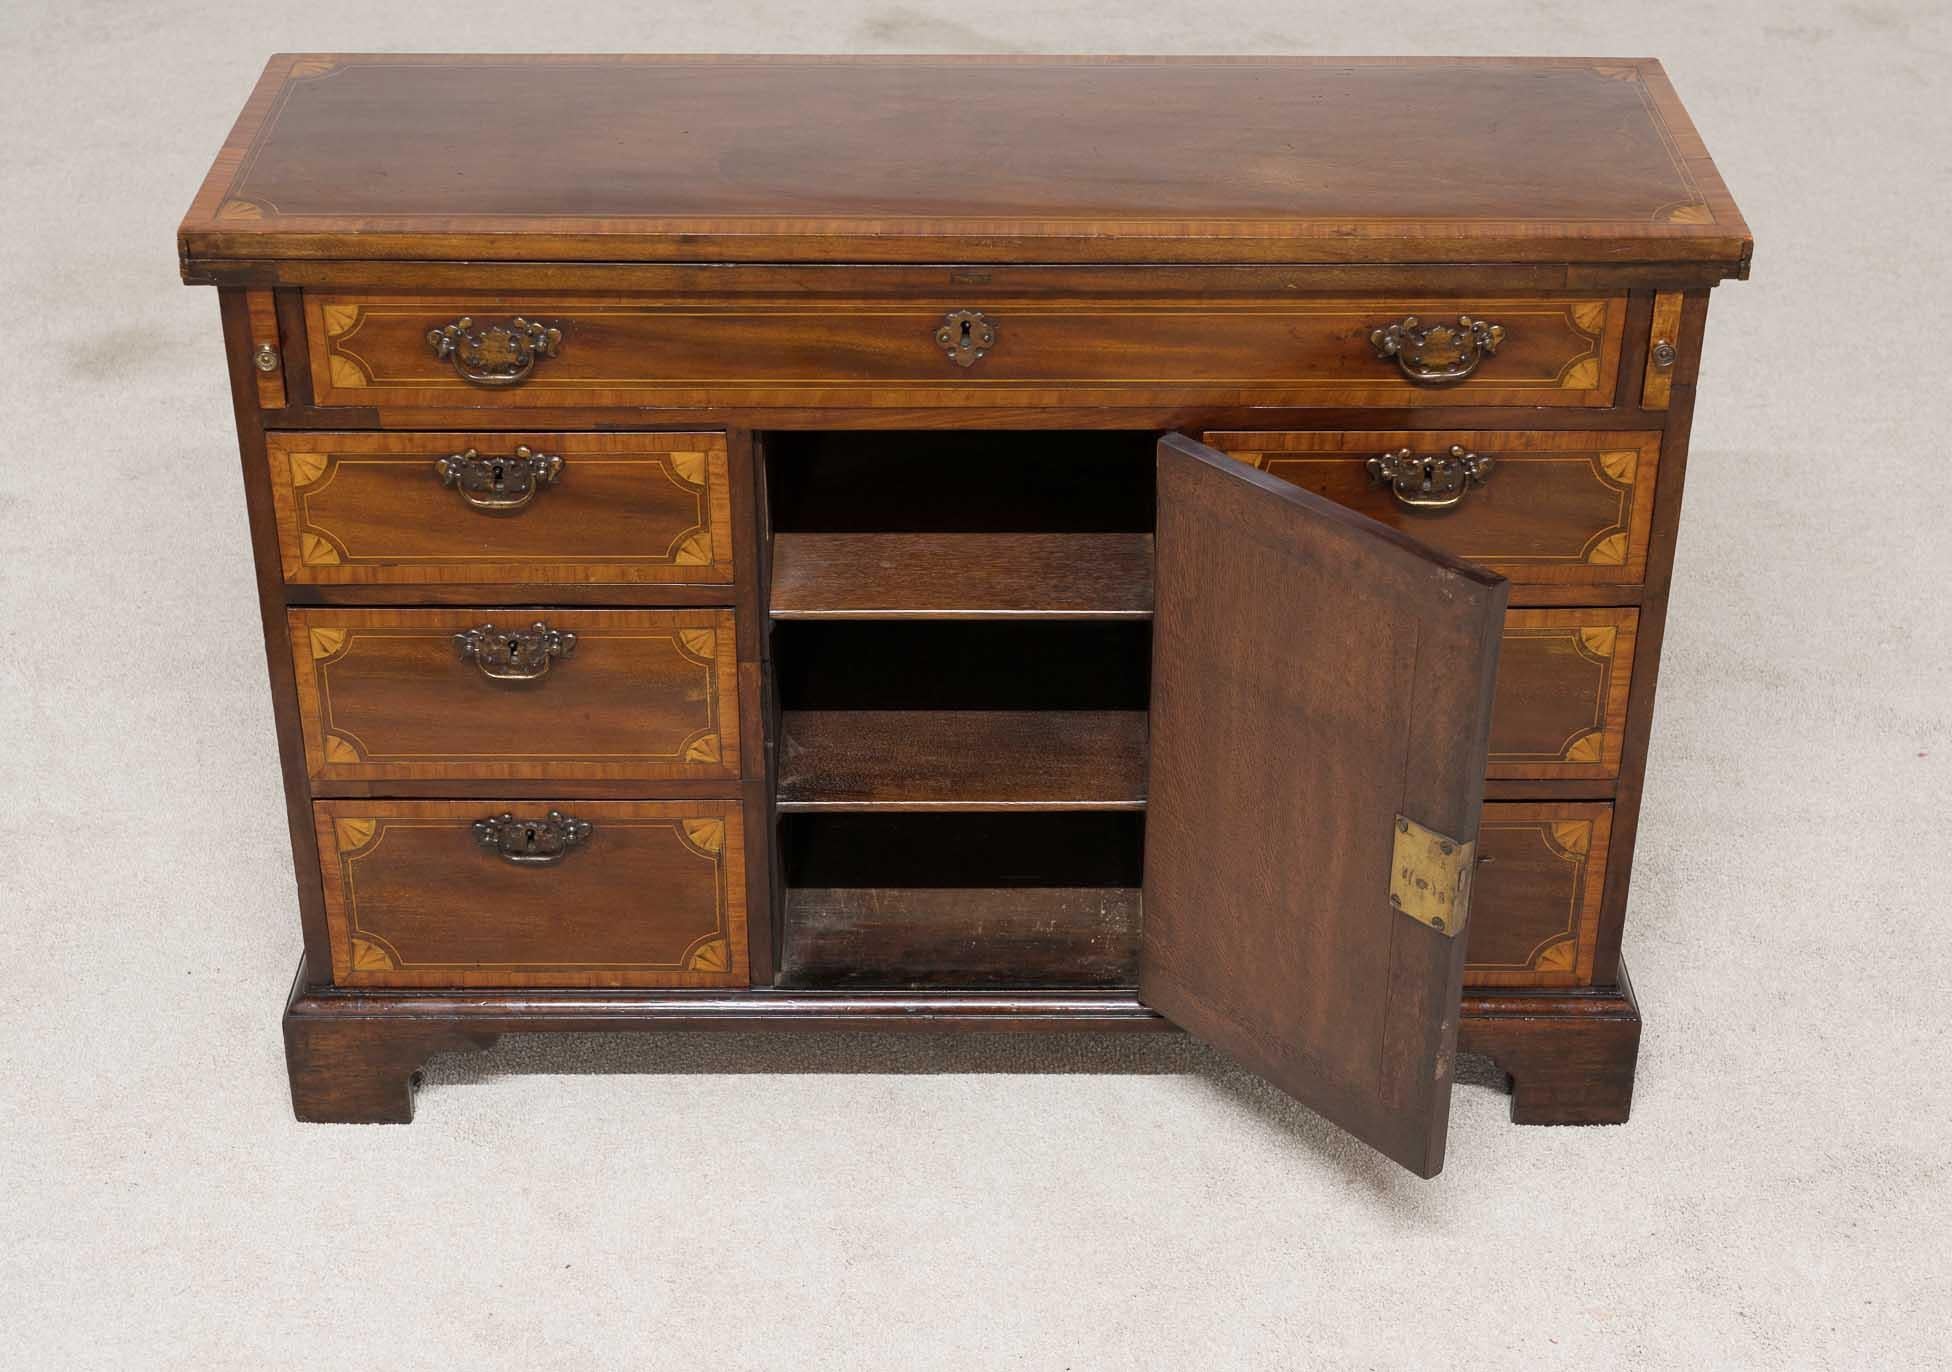 Mahogany and Satinwood Georgian Bachelors Chest Circa 1820
Unusual to find bachelors chests like this which are double fronted
Top opens out via swivel mechanism, designed for laying out clothes for the next day
Inlay work includes cross banding and